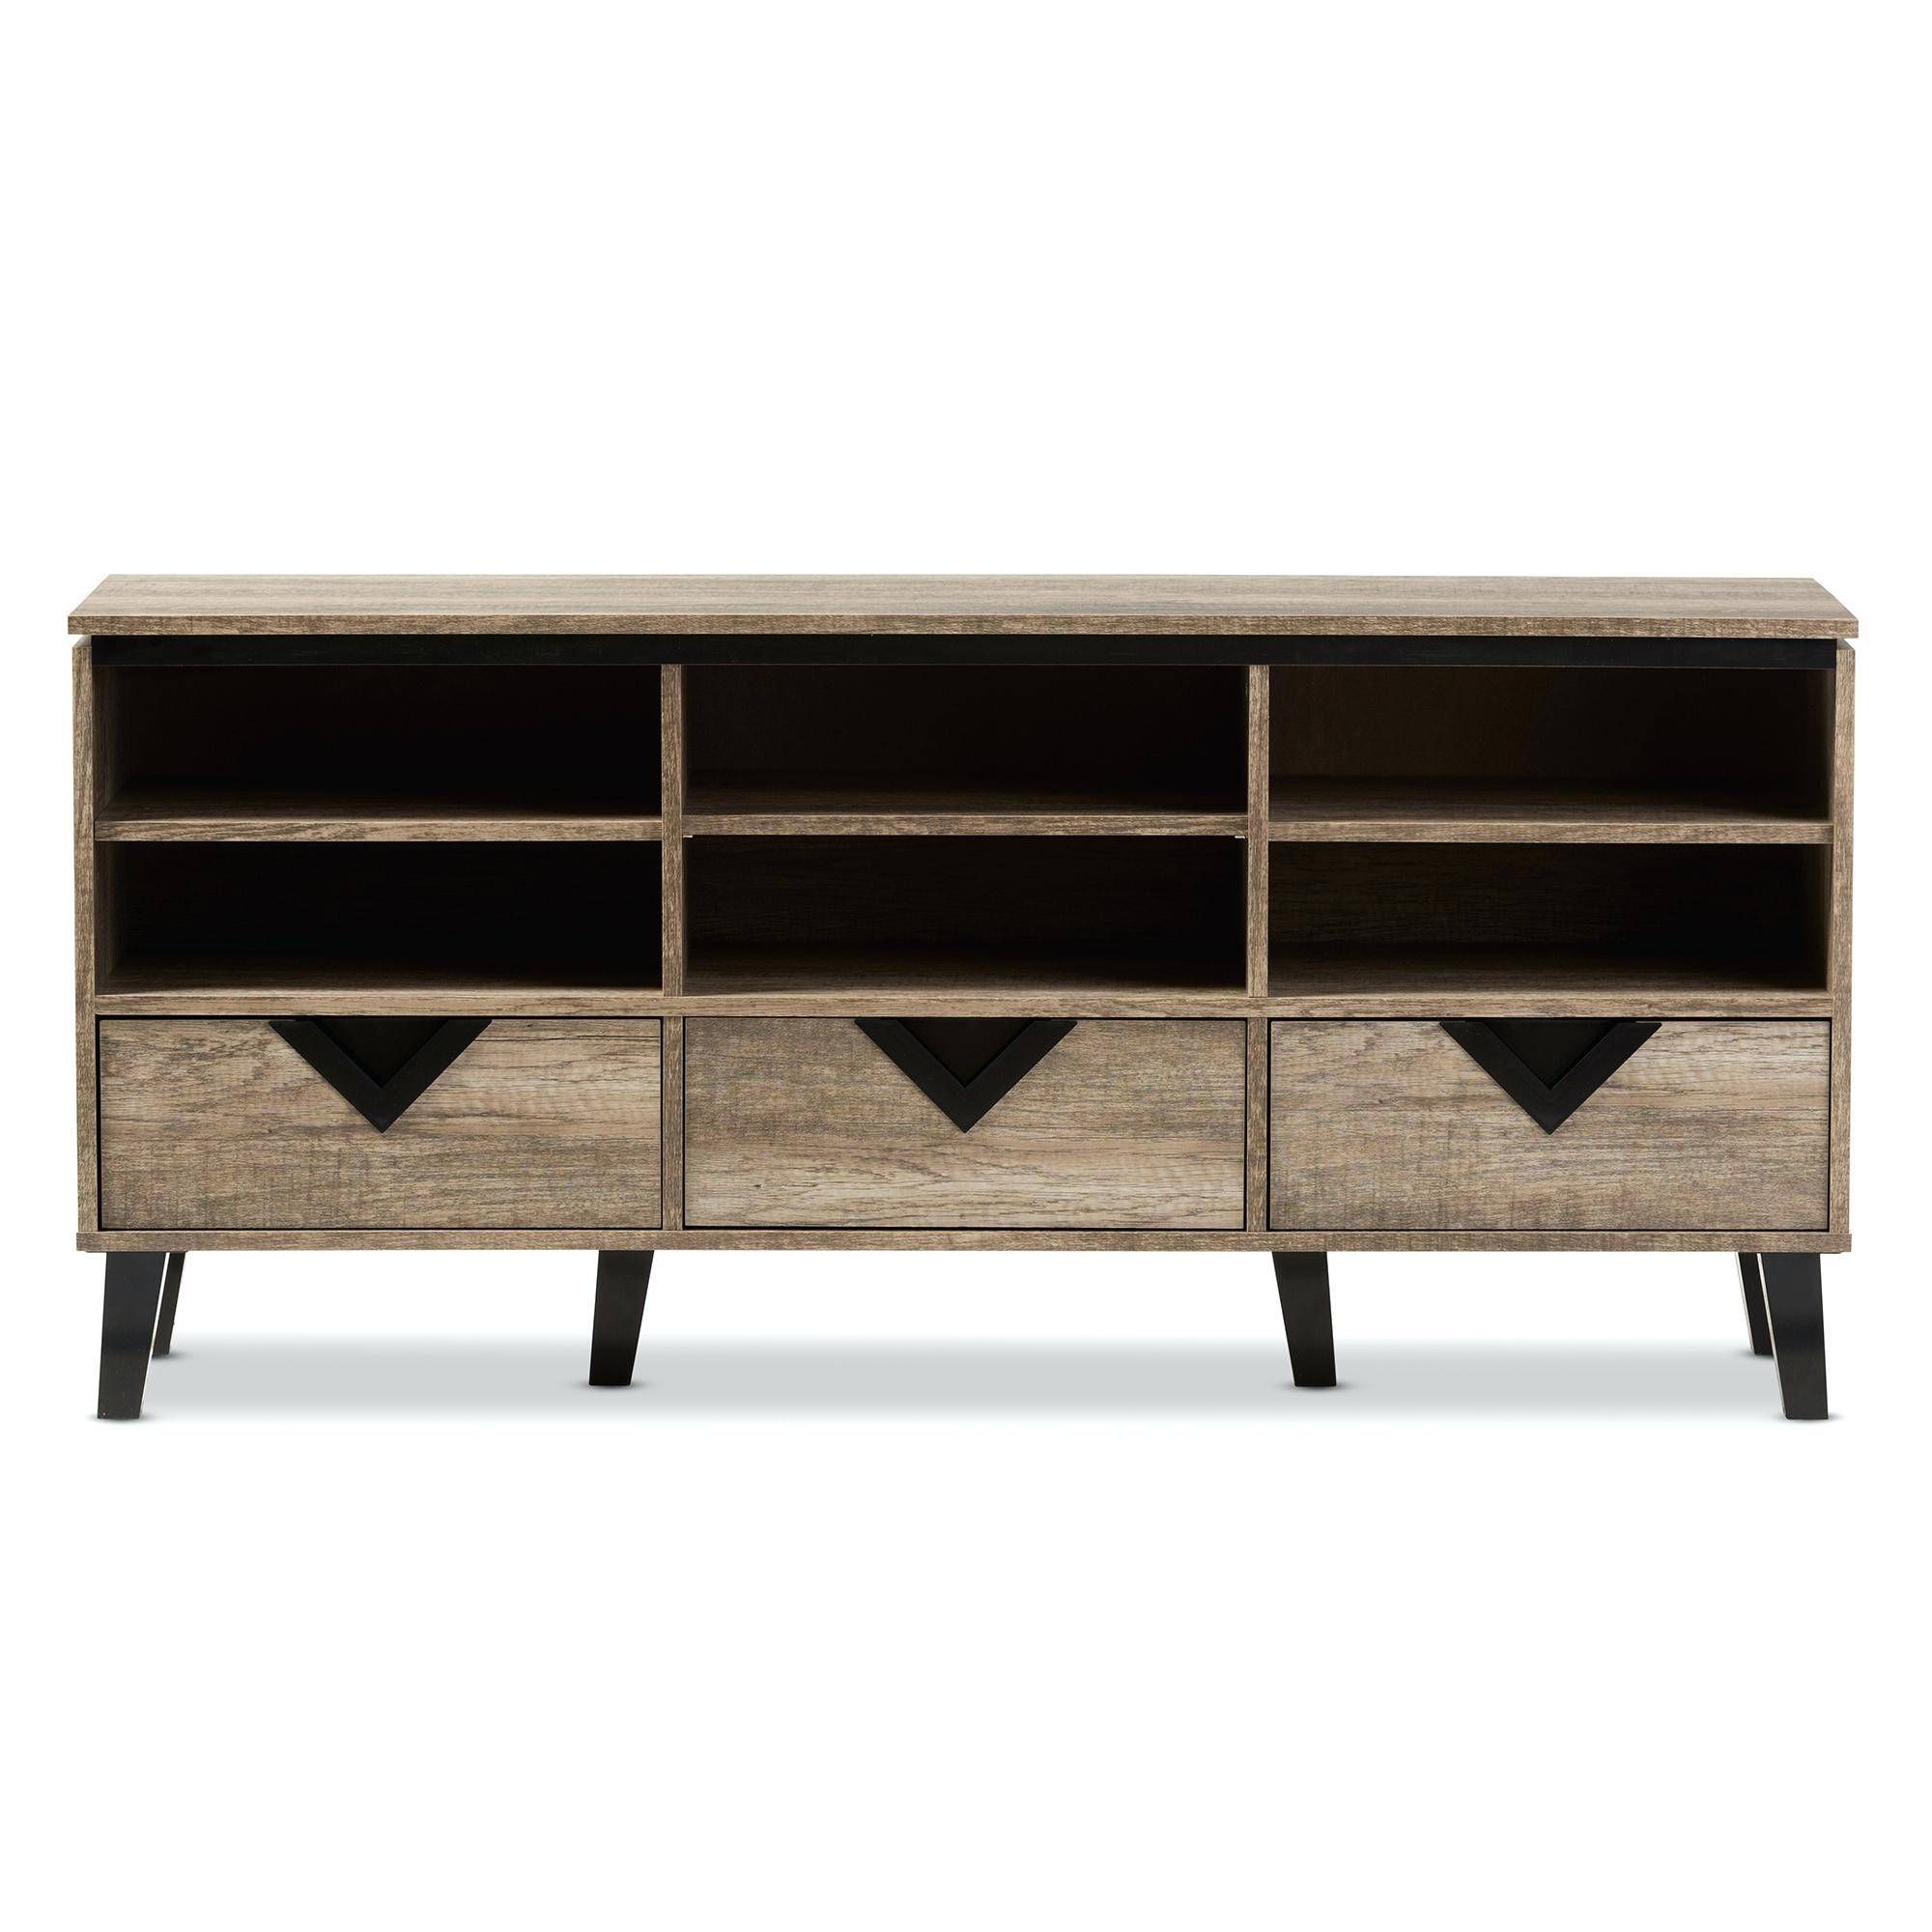 Tv Stand : 25 Chic Vertica Oak Low Contemporary Tv Stand Back Regarding Low Corner Tv Stands (View 11 of 15)